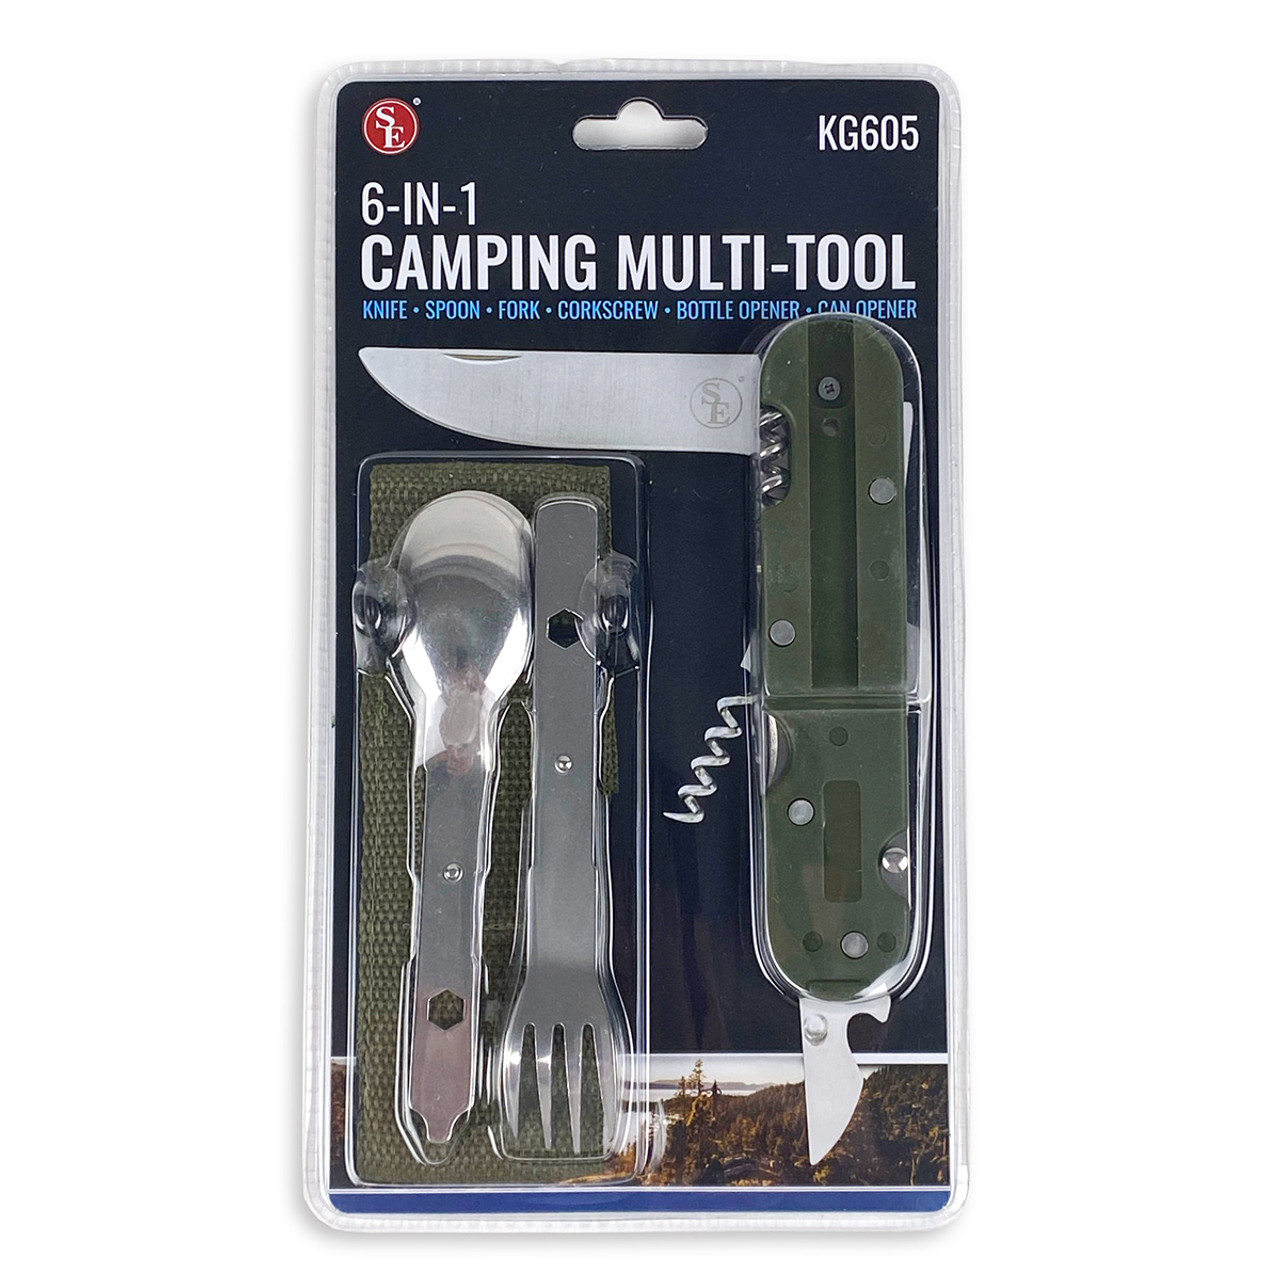 6-IN-1 Camping Multi-Tool With Carrying Case - Camping Emergency Cooking  Supplies